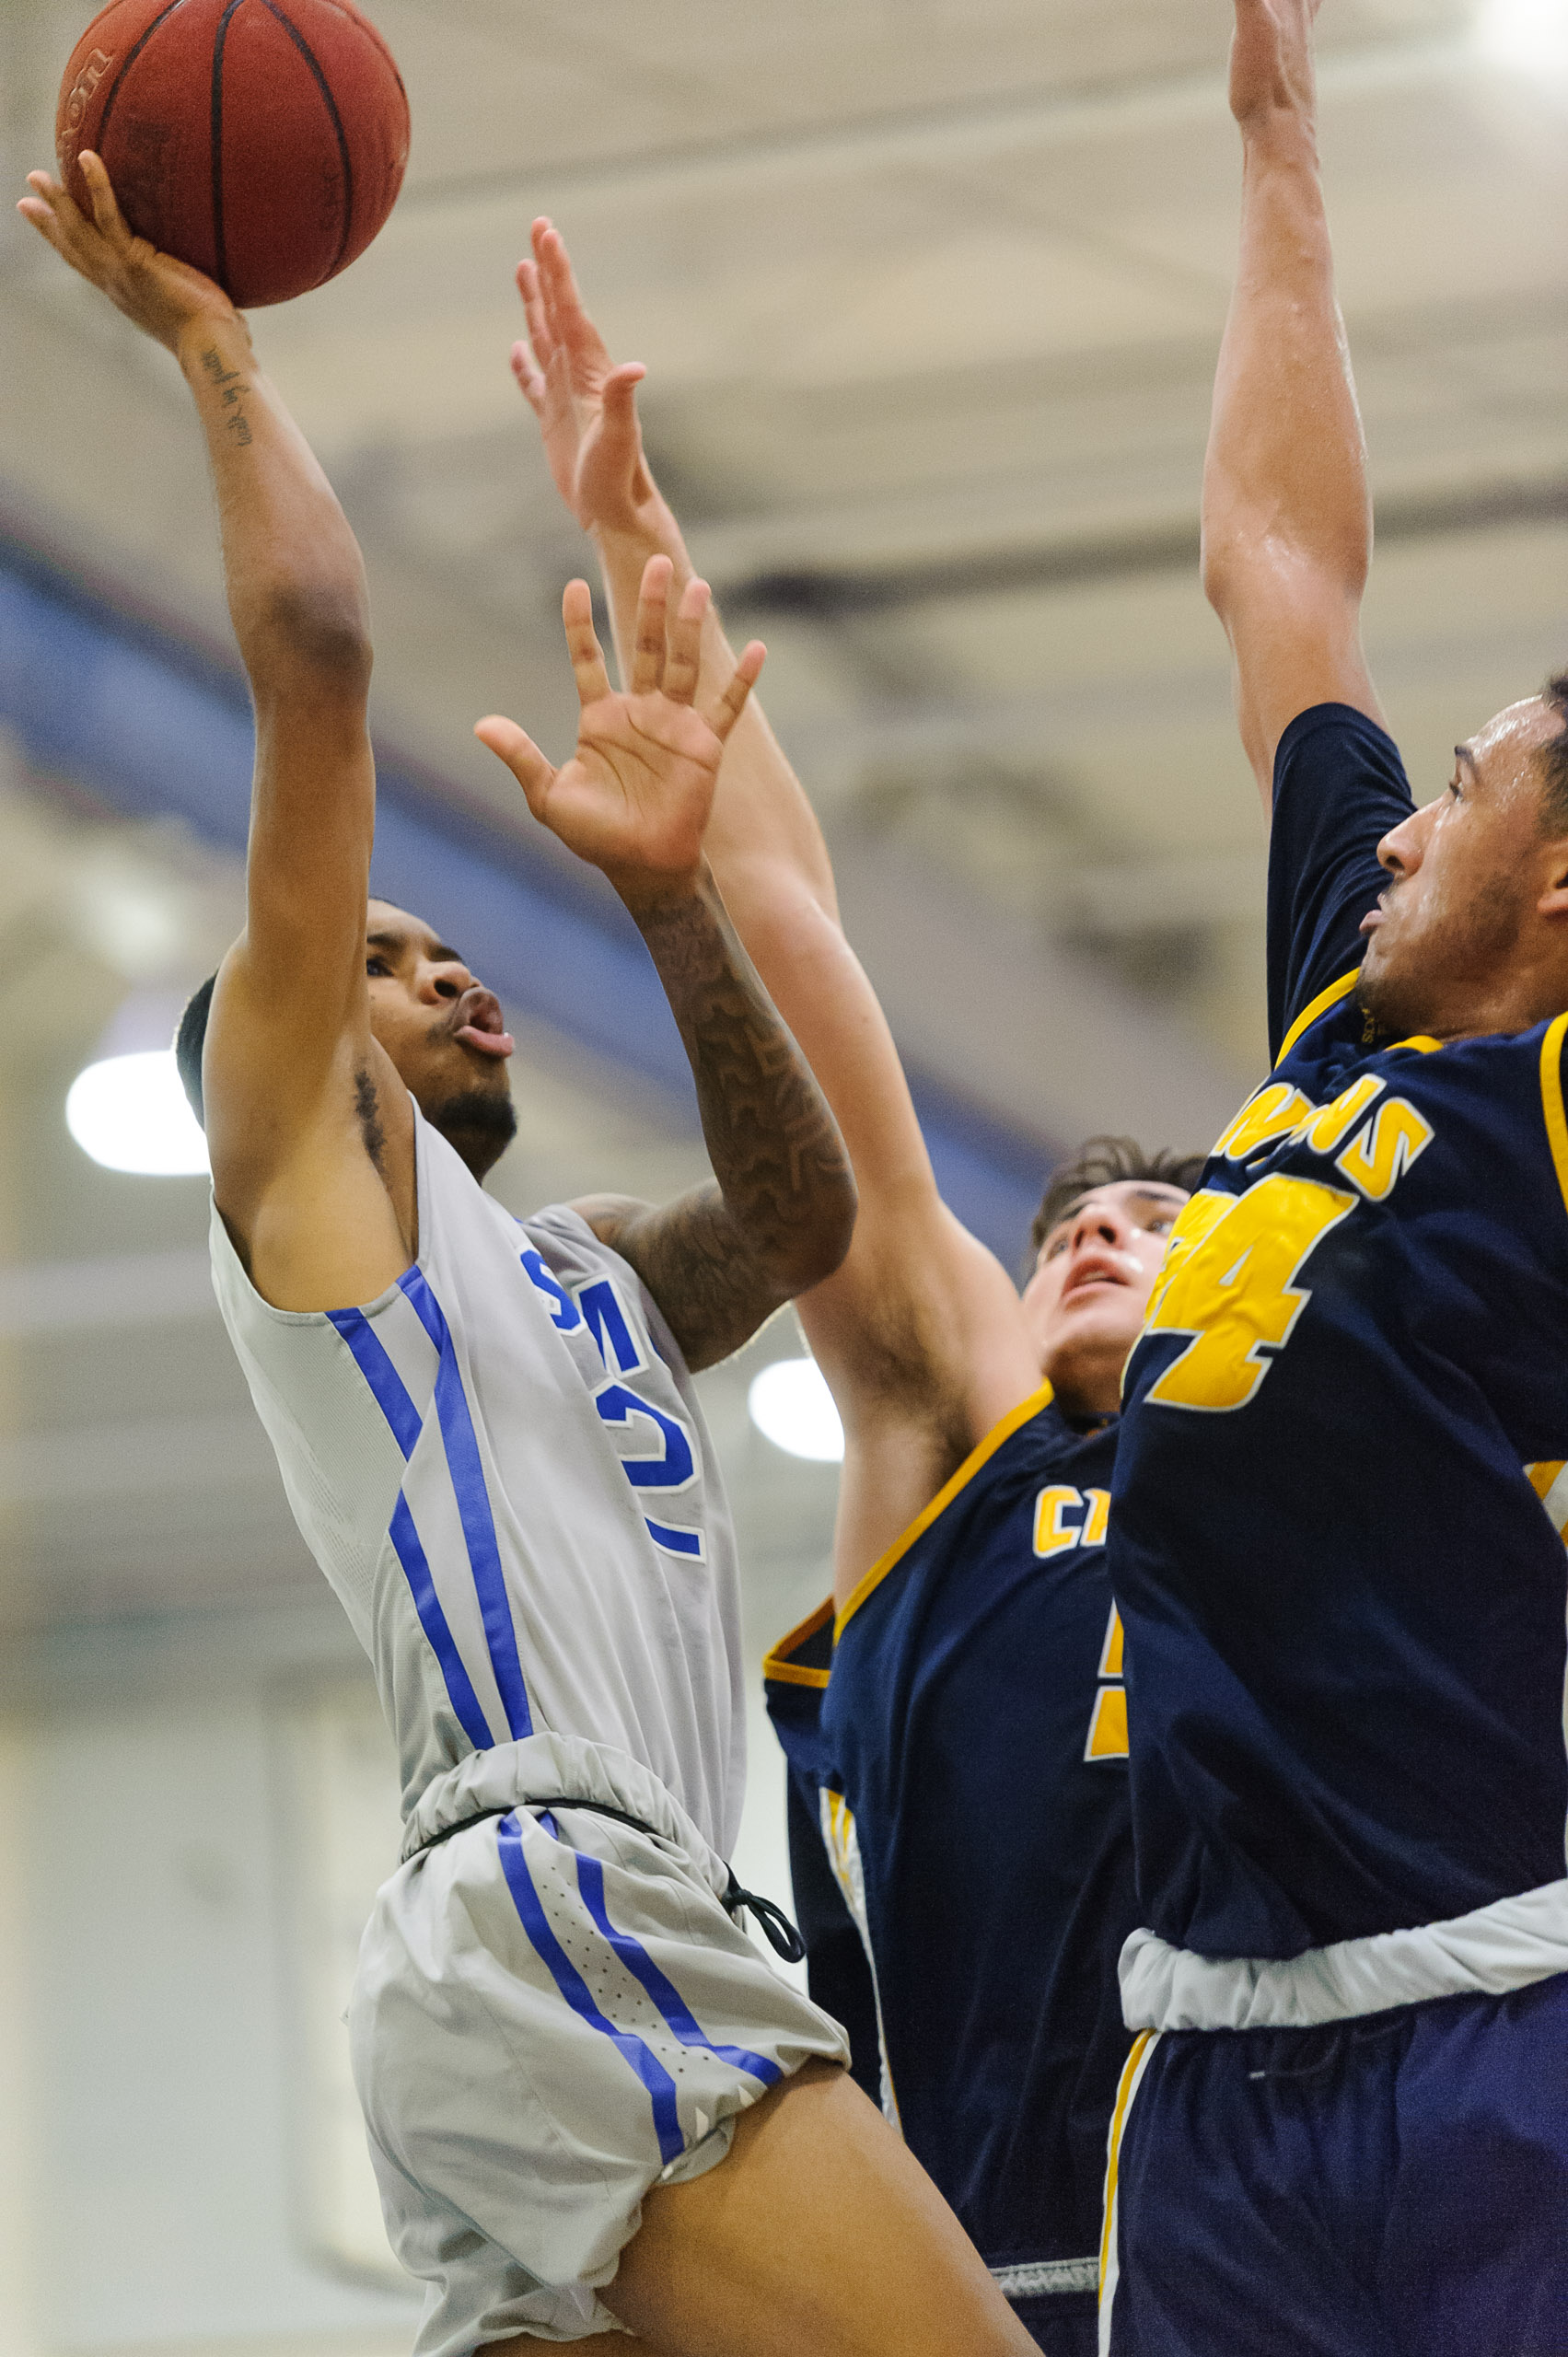  Guard Joe Robinson (2) of Santa Monica College shoots a floater while contested by the College of the Canyons defense. The Santa Monica College Corsairs lose the game 74-72 to the College of the Canyons Cougars. The game was held at the SMC Pavilion